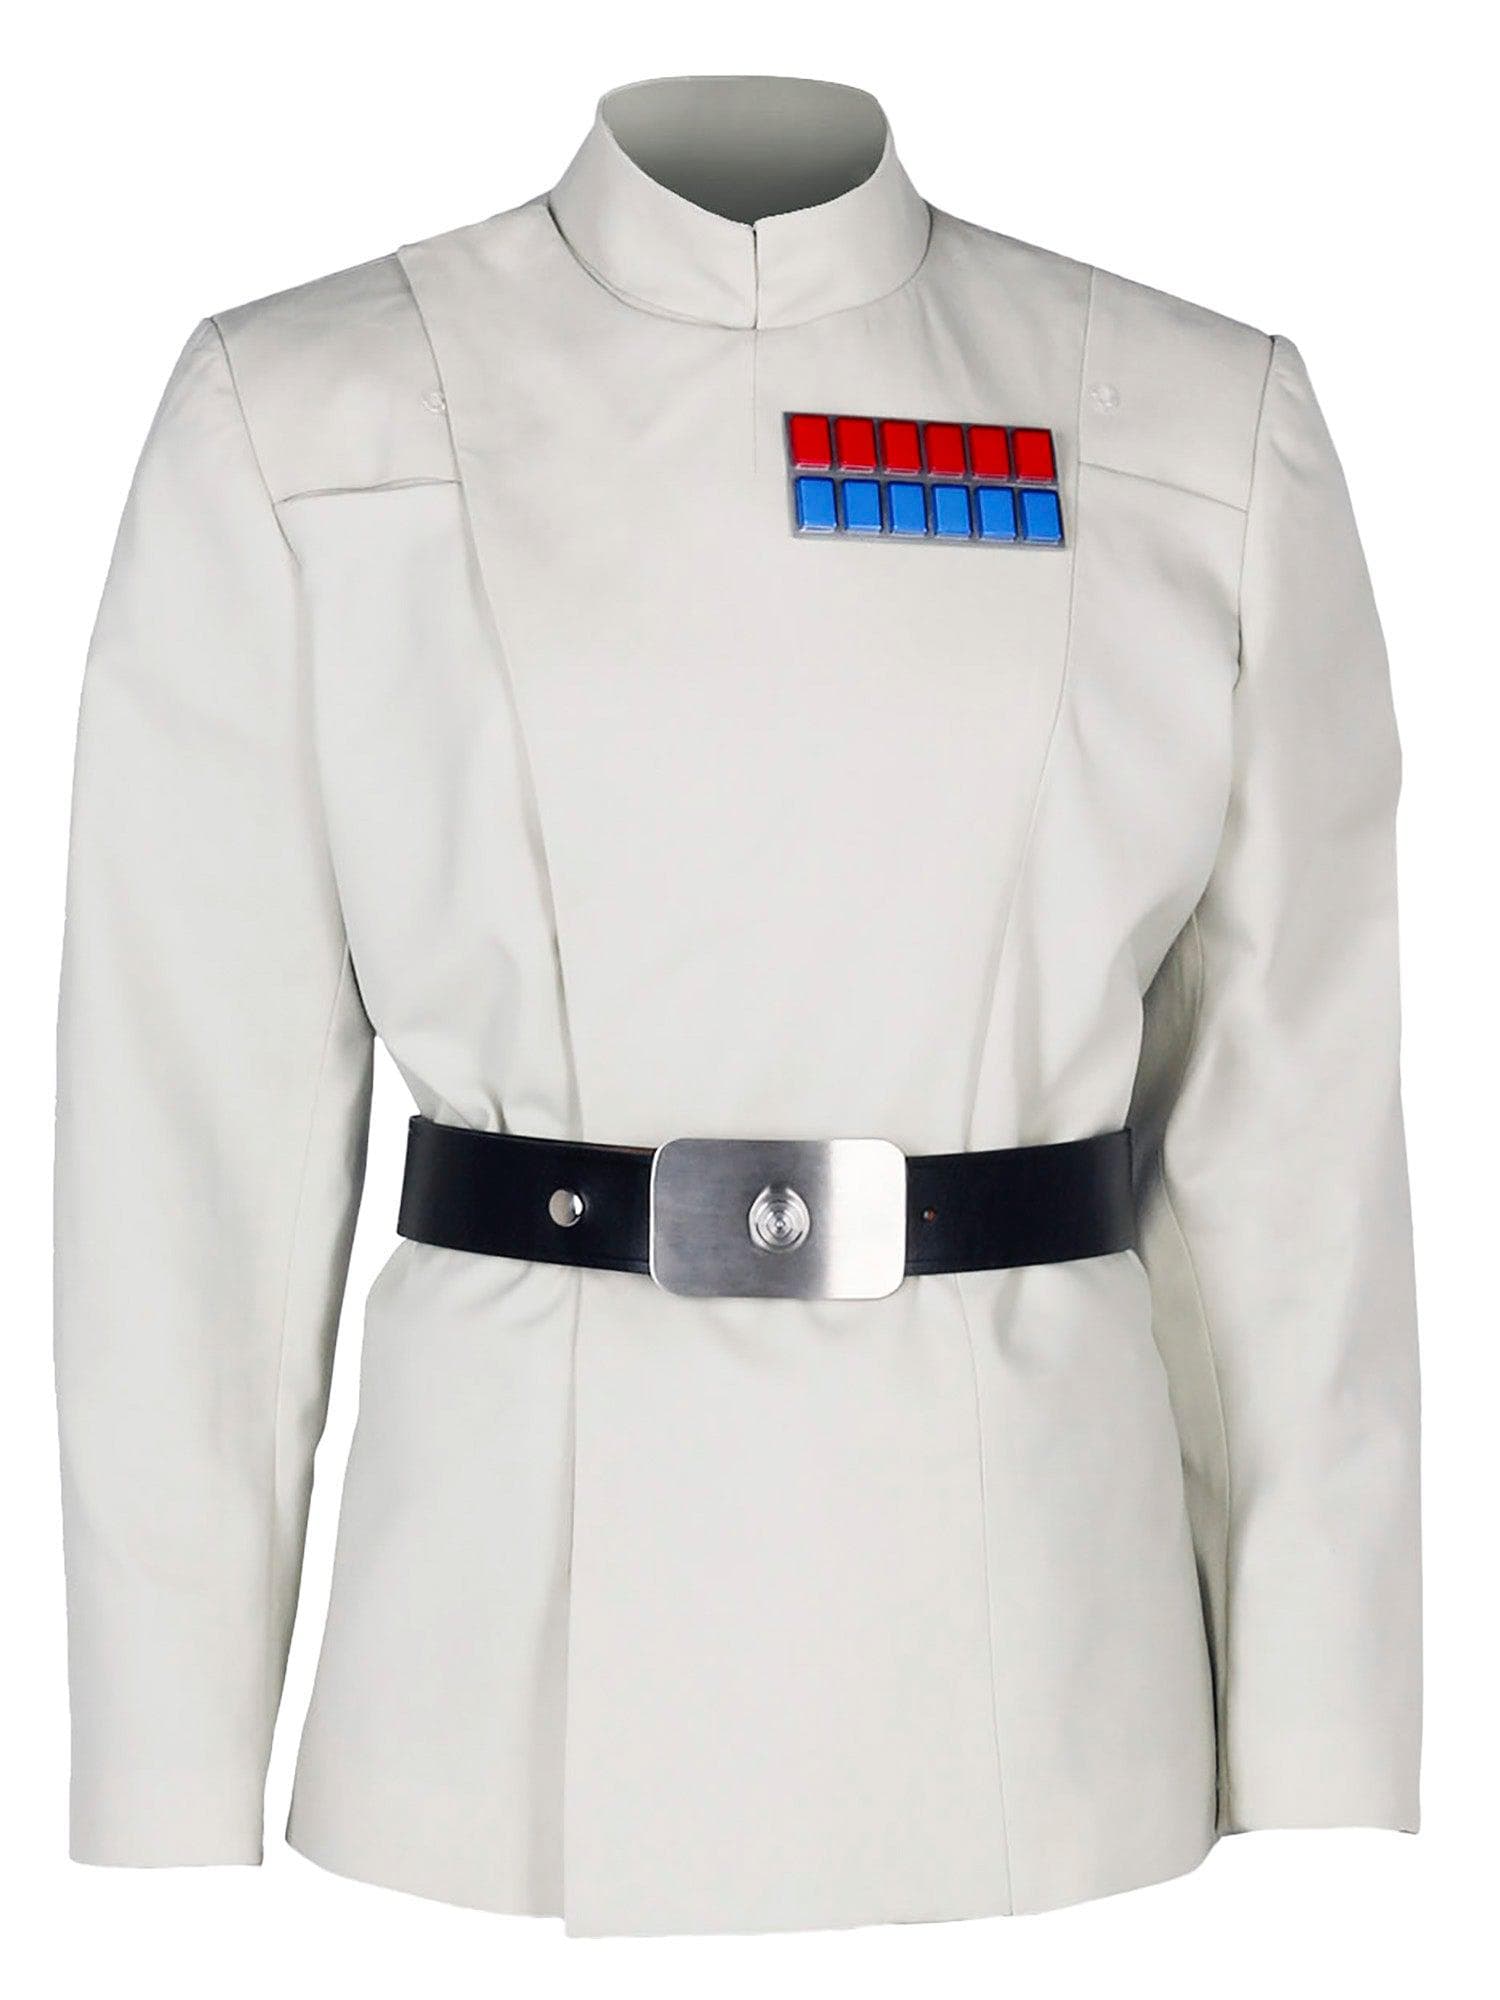 Denuo Novo Star Wars: Rogue One Imperial Admiral Tunic Costume Accessory - costumes.com